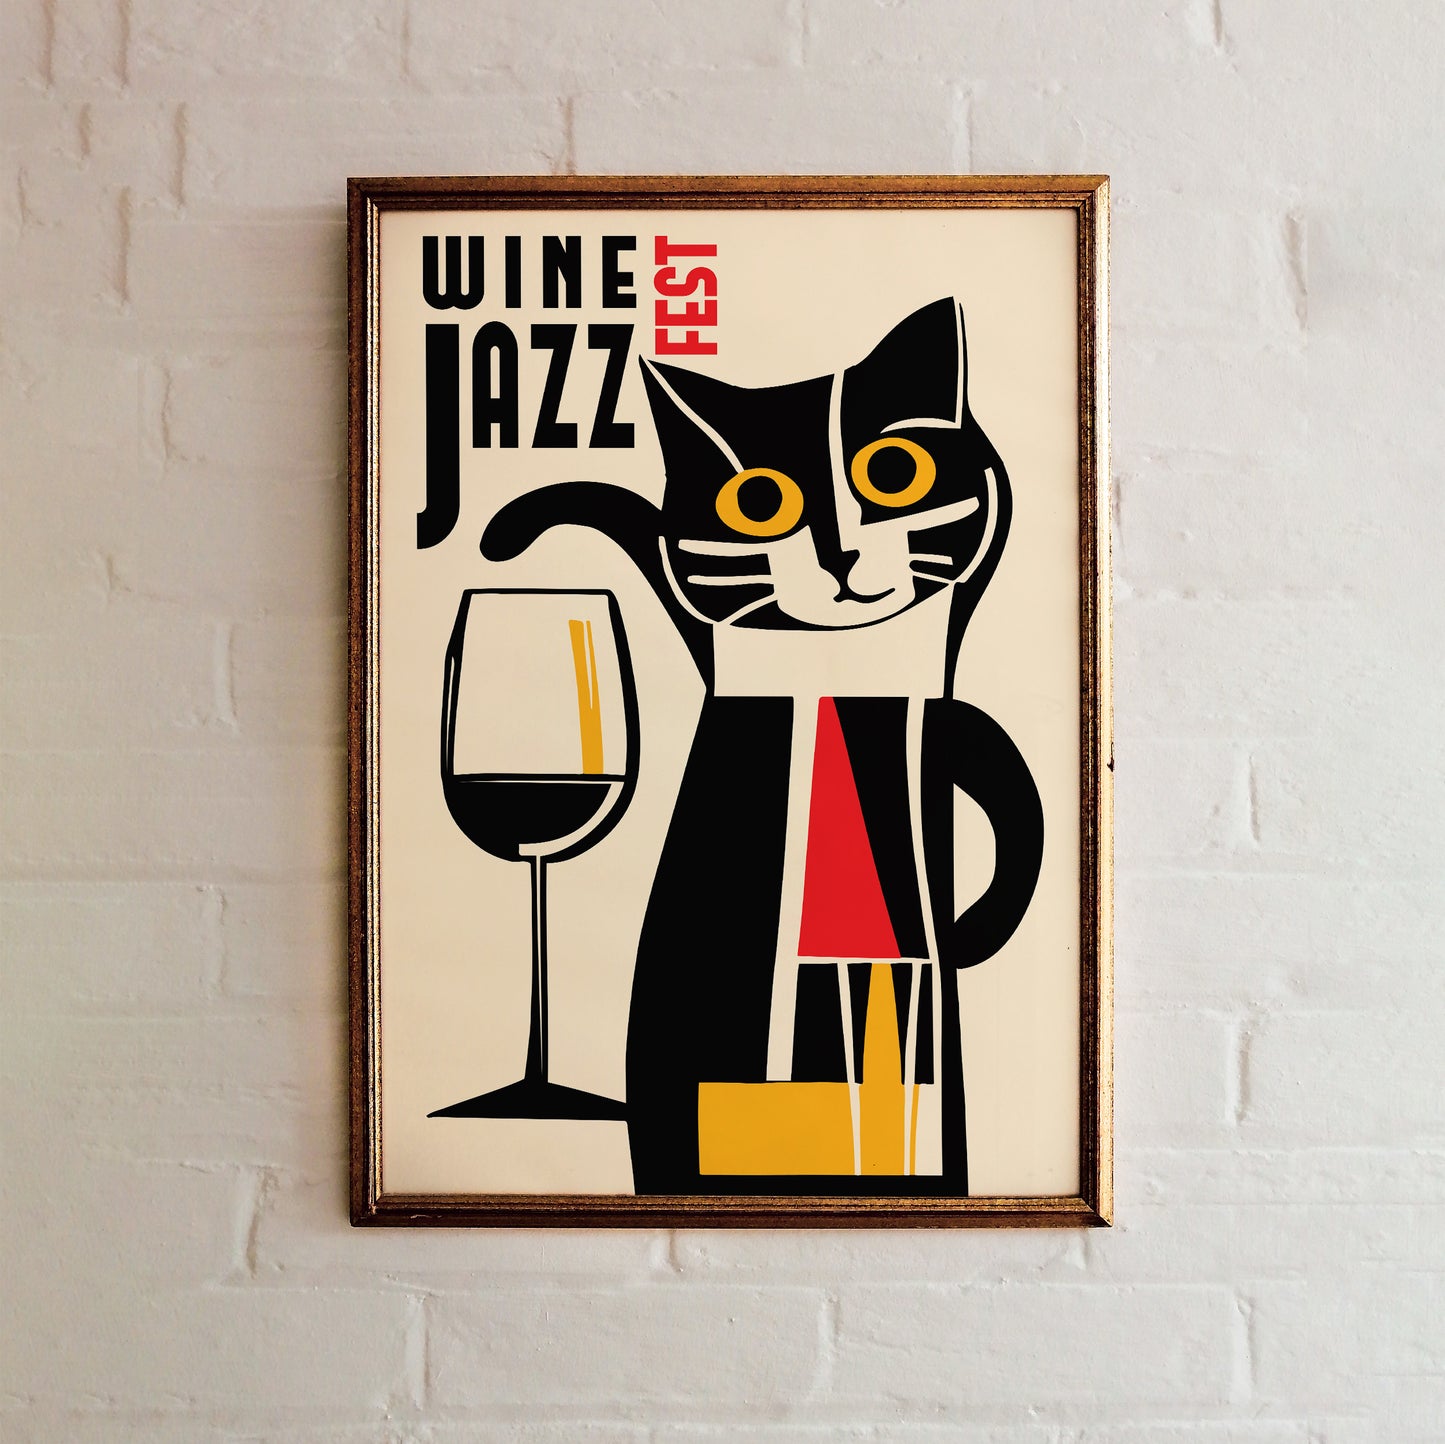 Wine and Jazz Festival Cat Poster